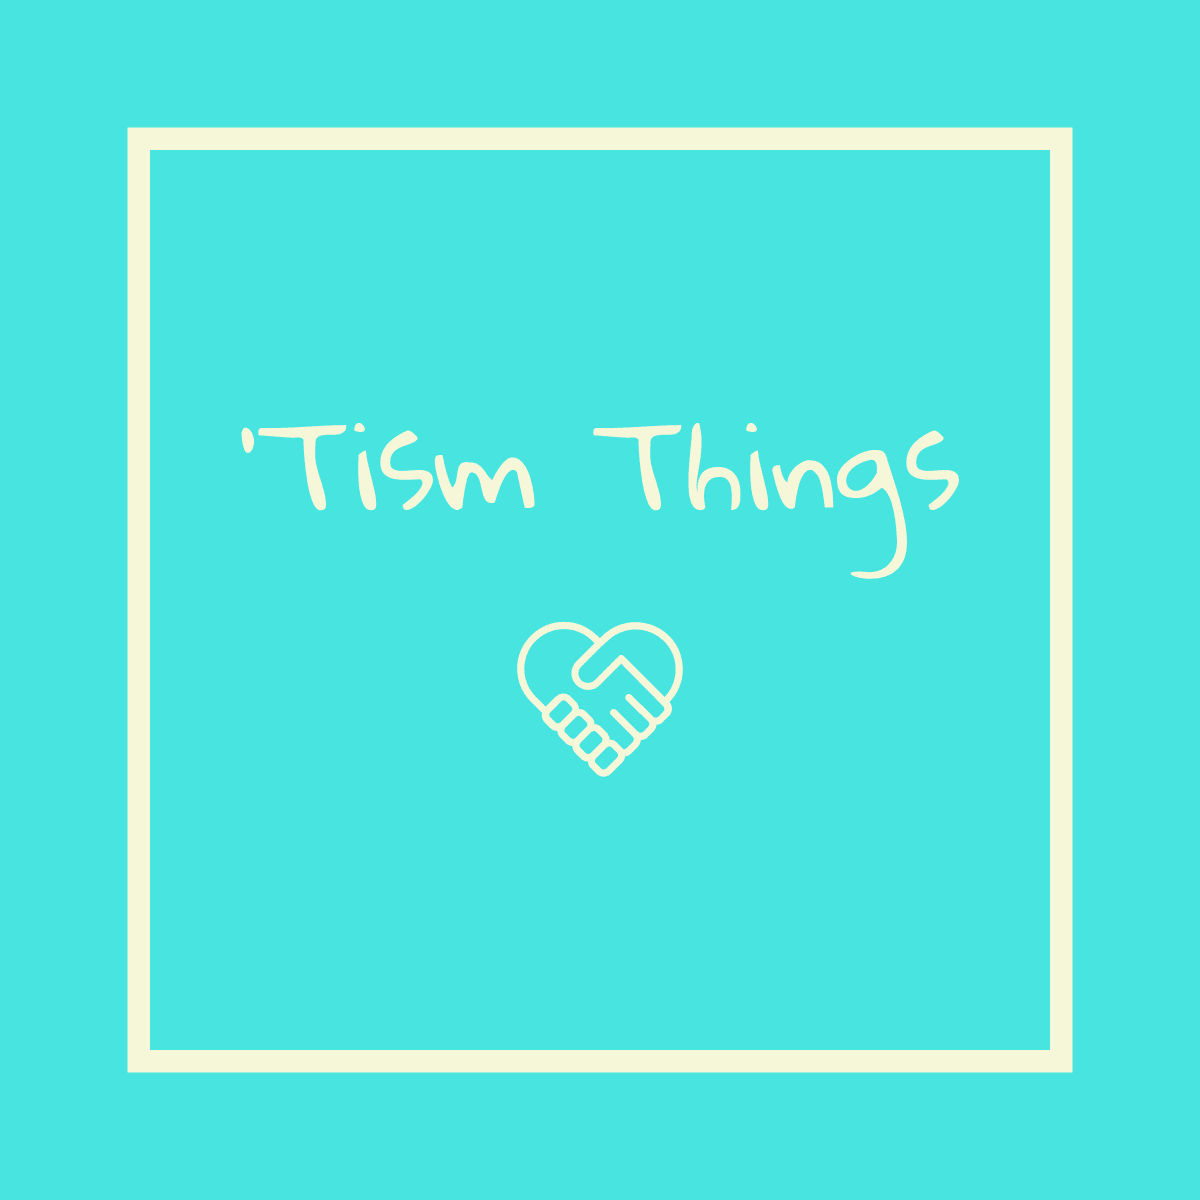 The 'Tism Things Blog